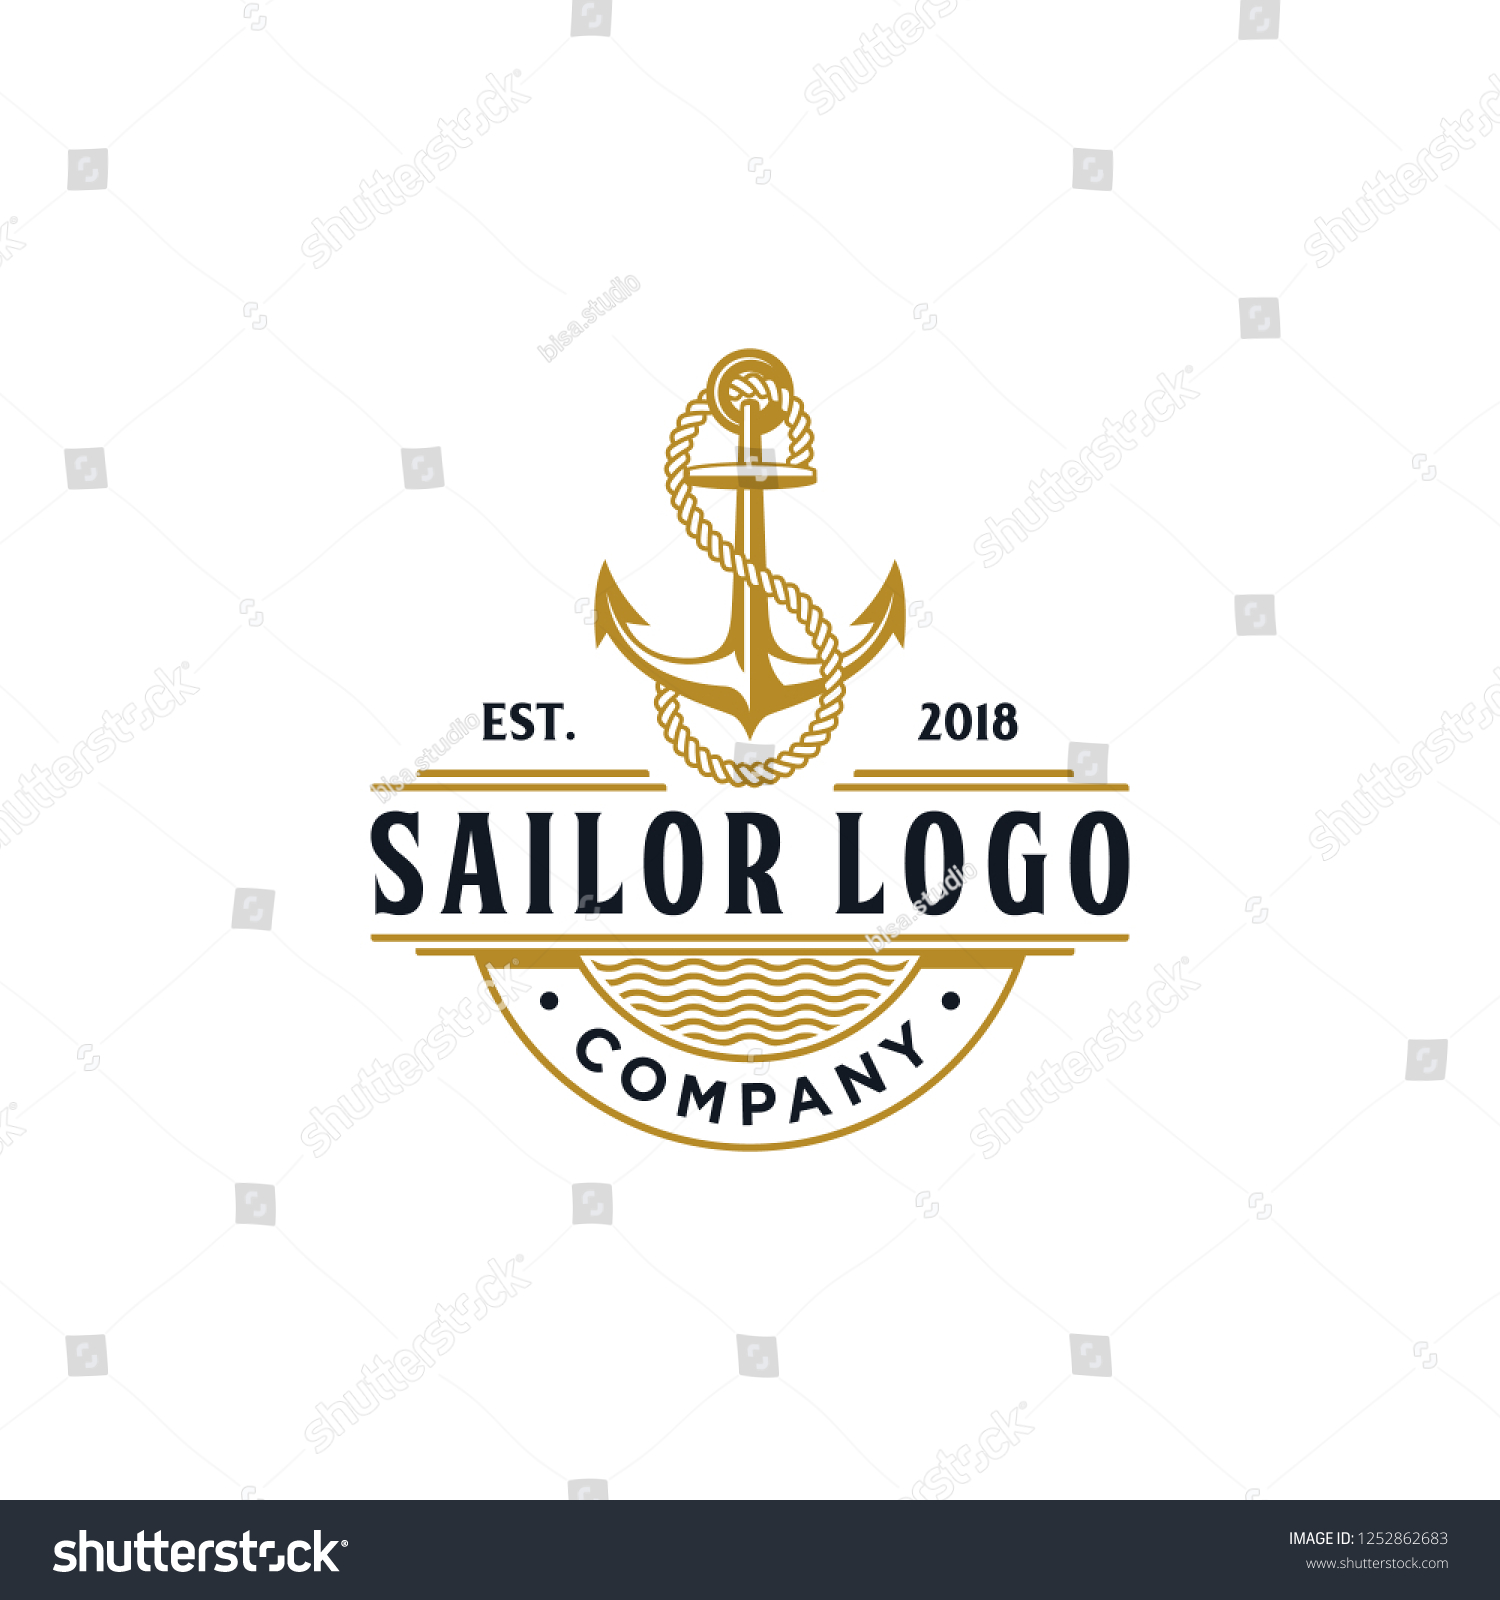 SVG of Classic Vintage Retro Country Emblem Anchor S rope for Sailor logo Typography with initial letter S in rope for Logo design inspiration svg